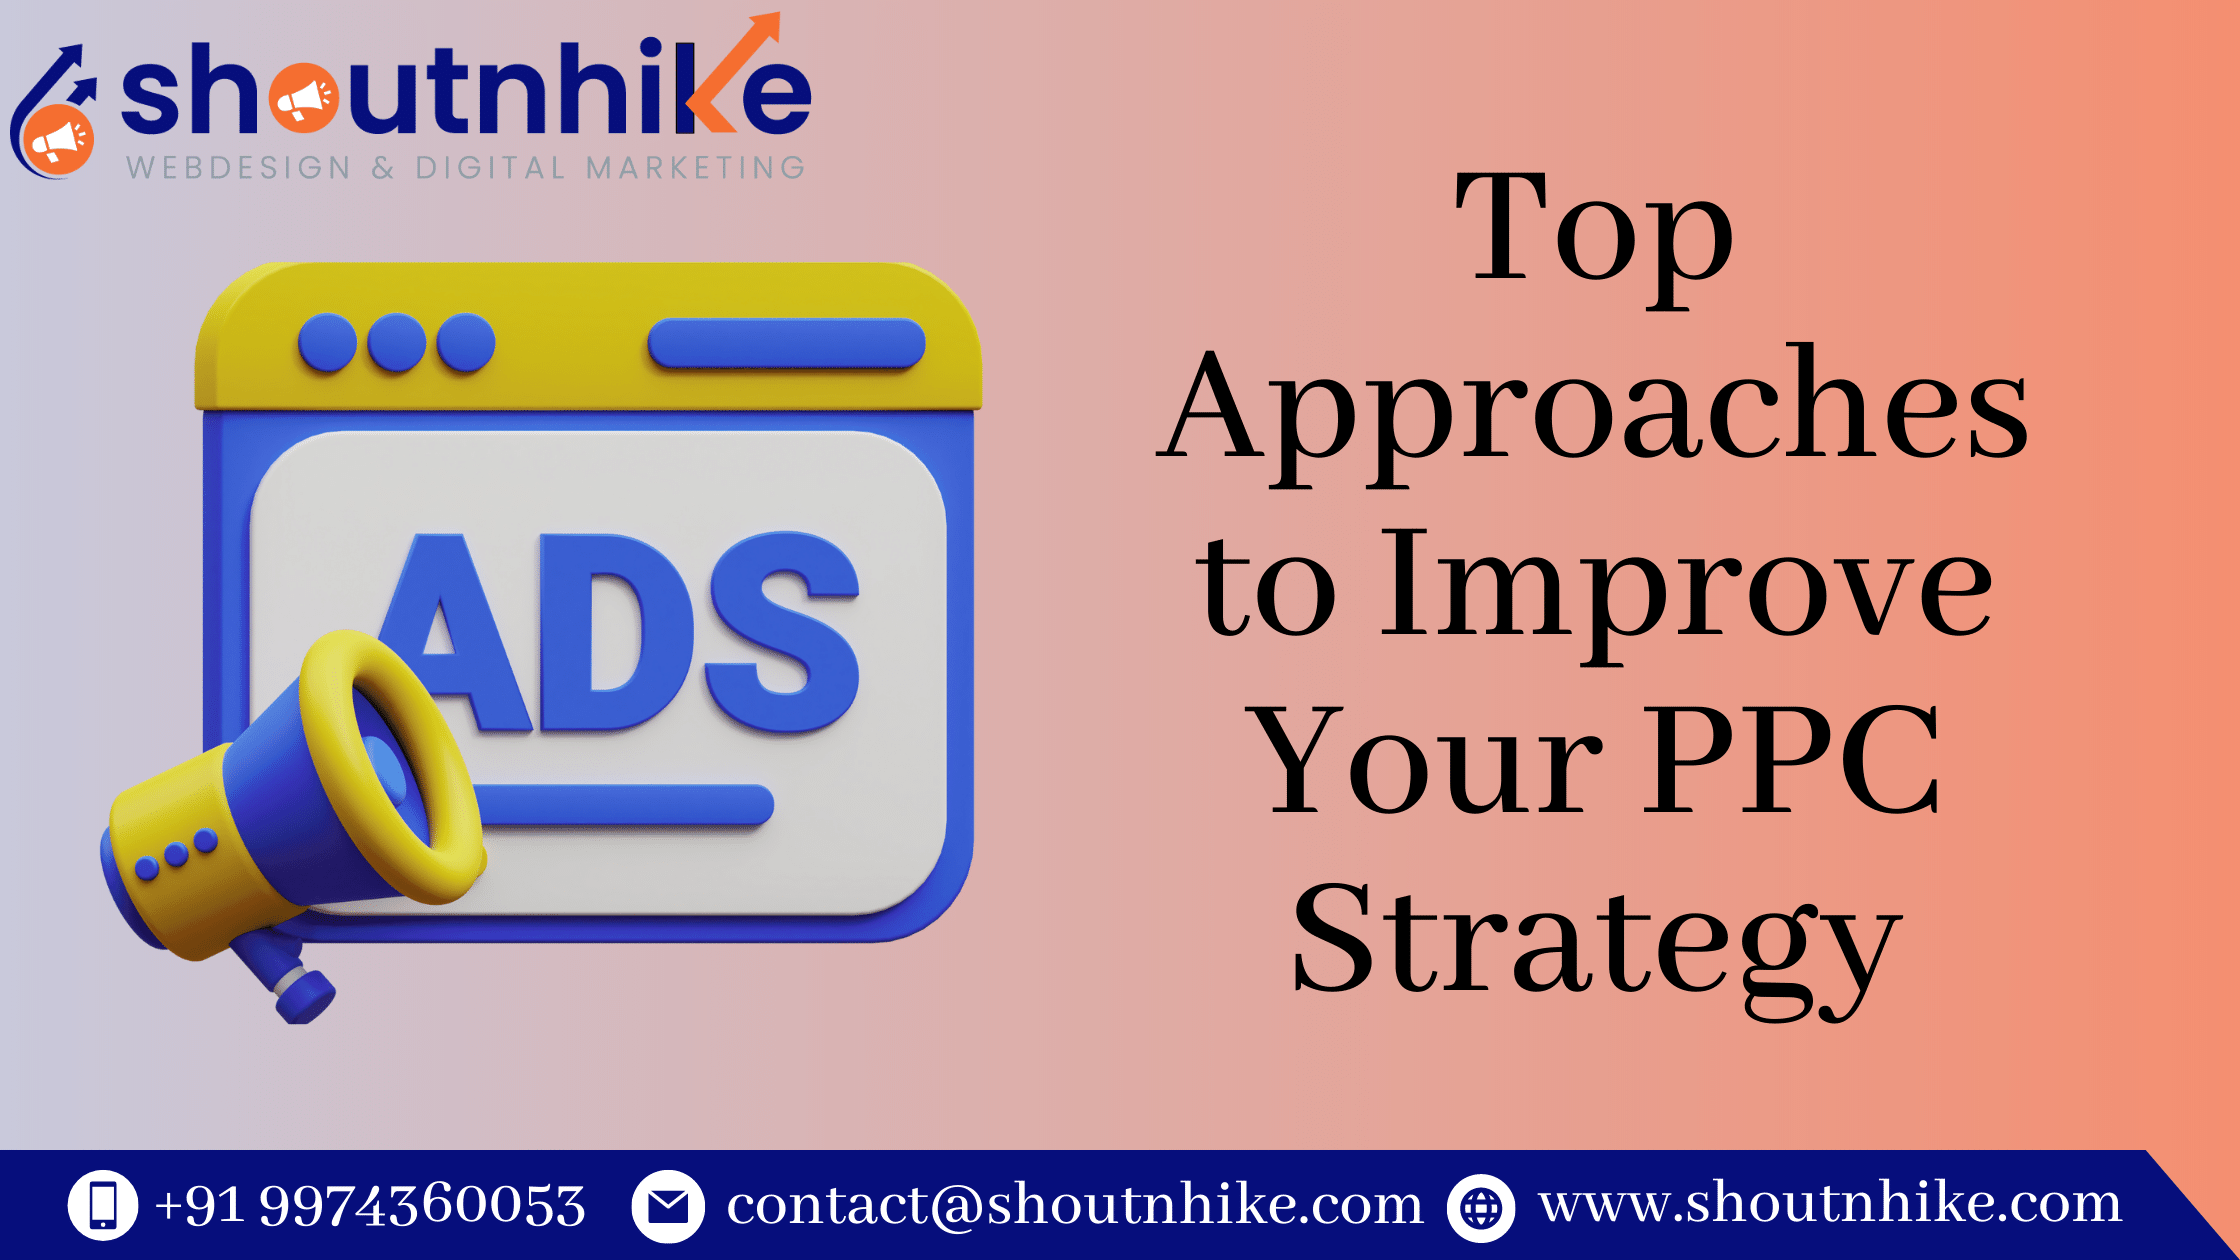 Top Approaches to Improve Your PPC Strategy